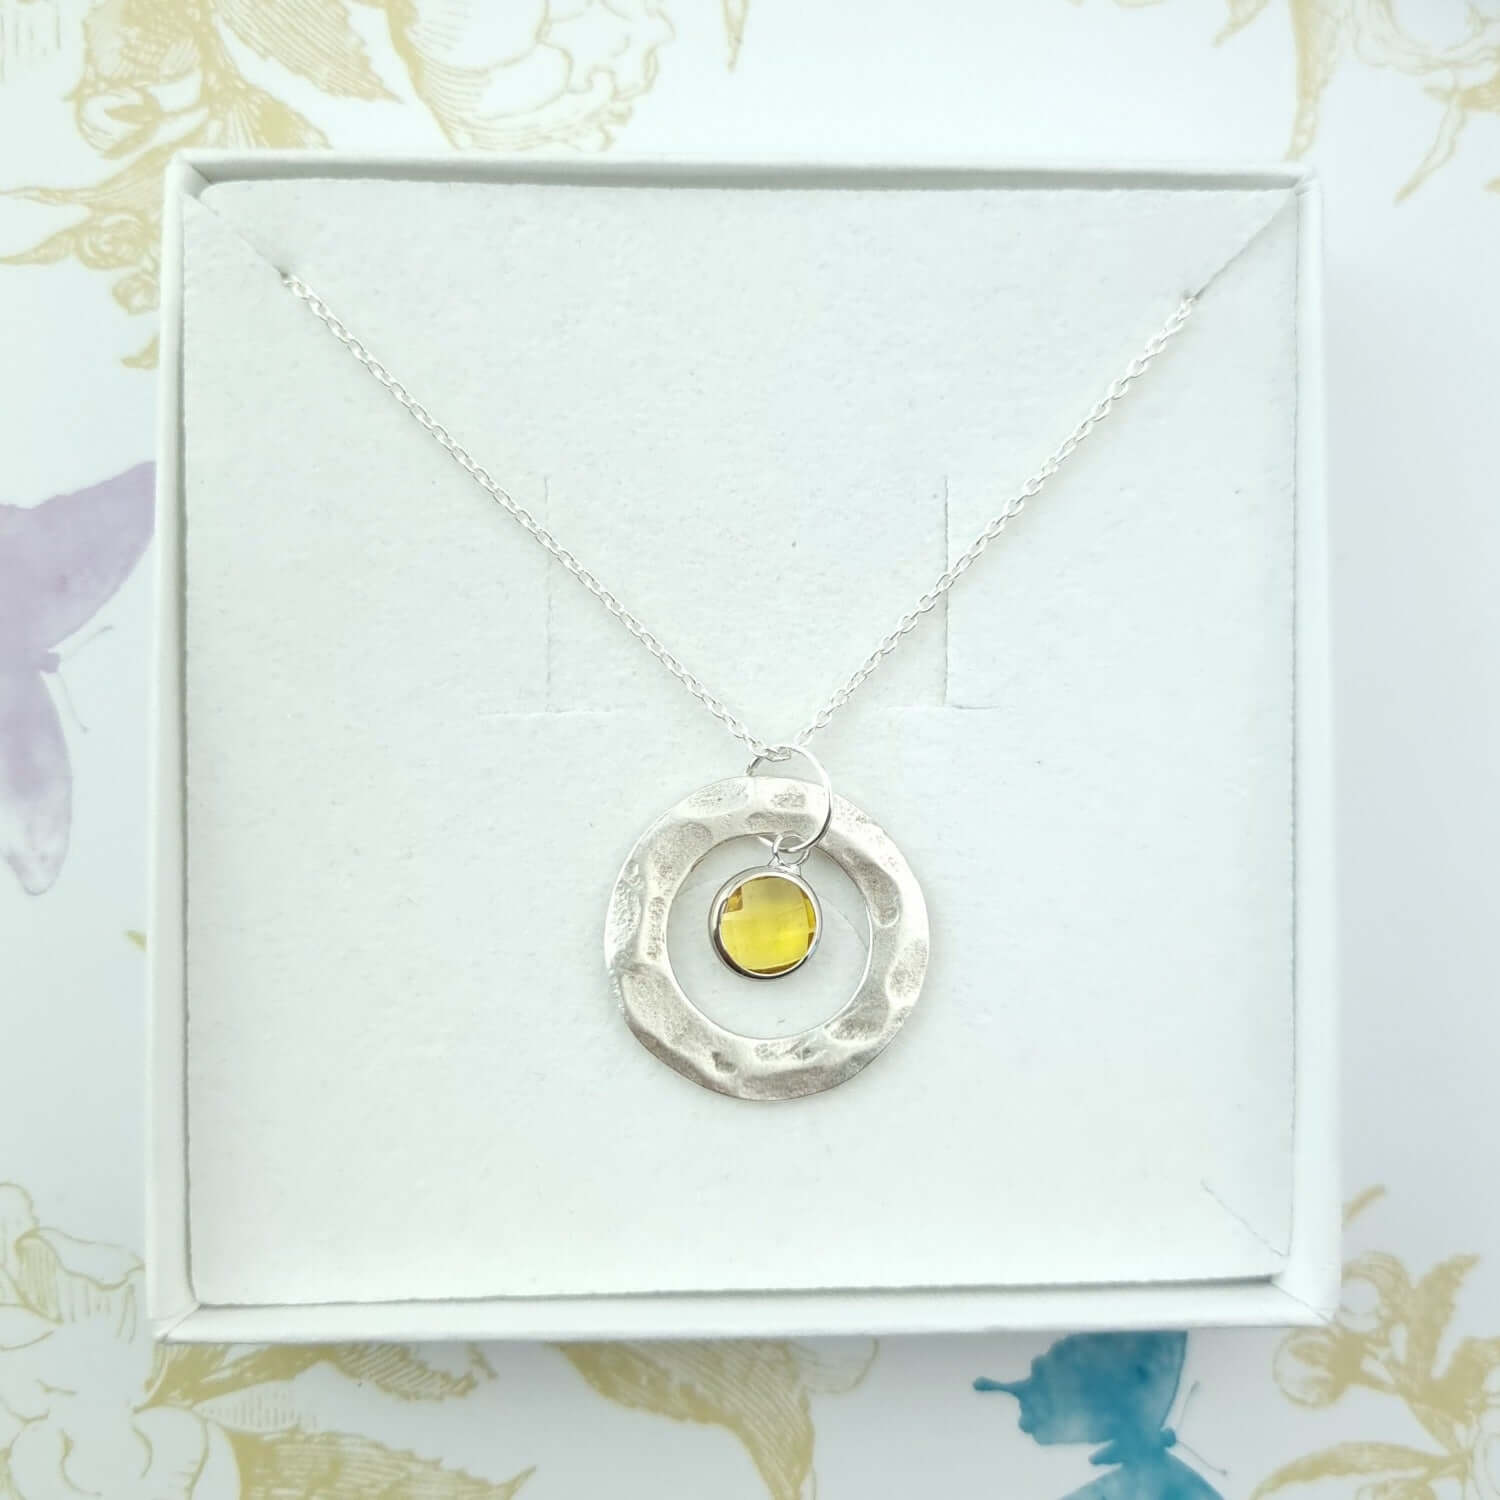 November birthstone necklace in a gift box